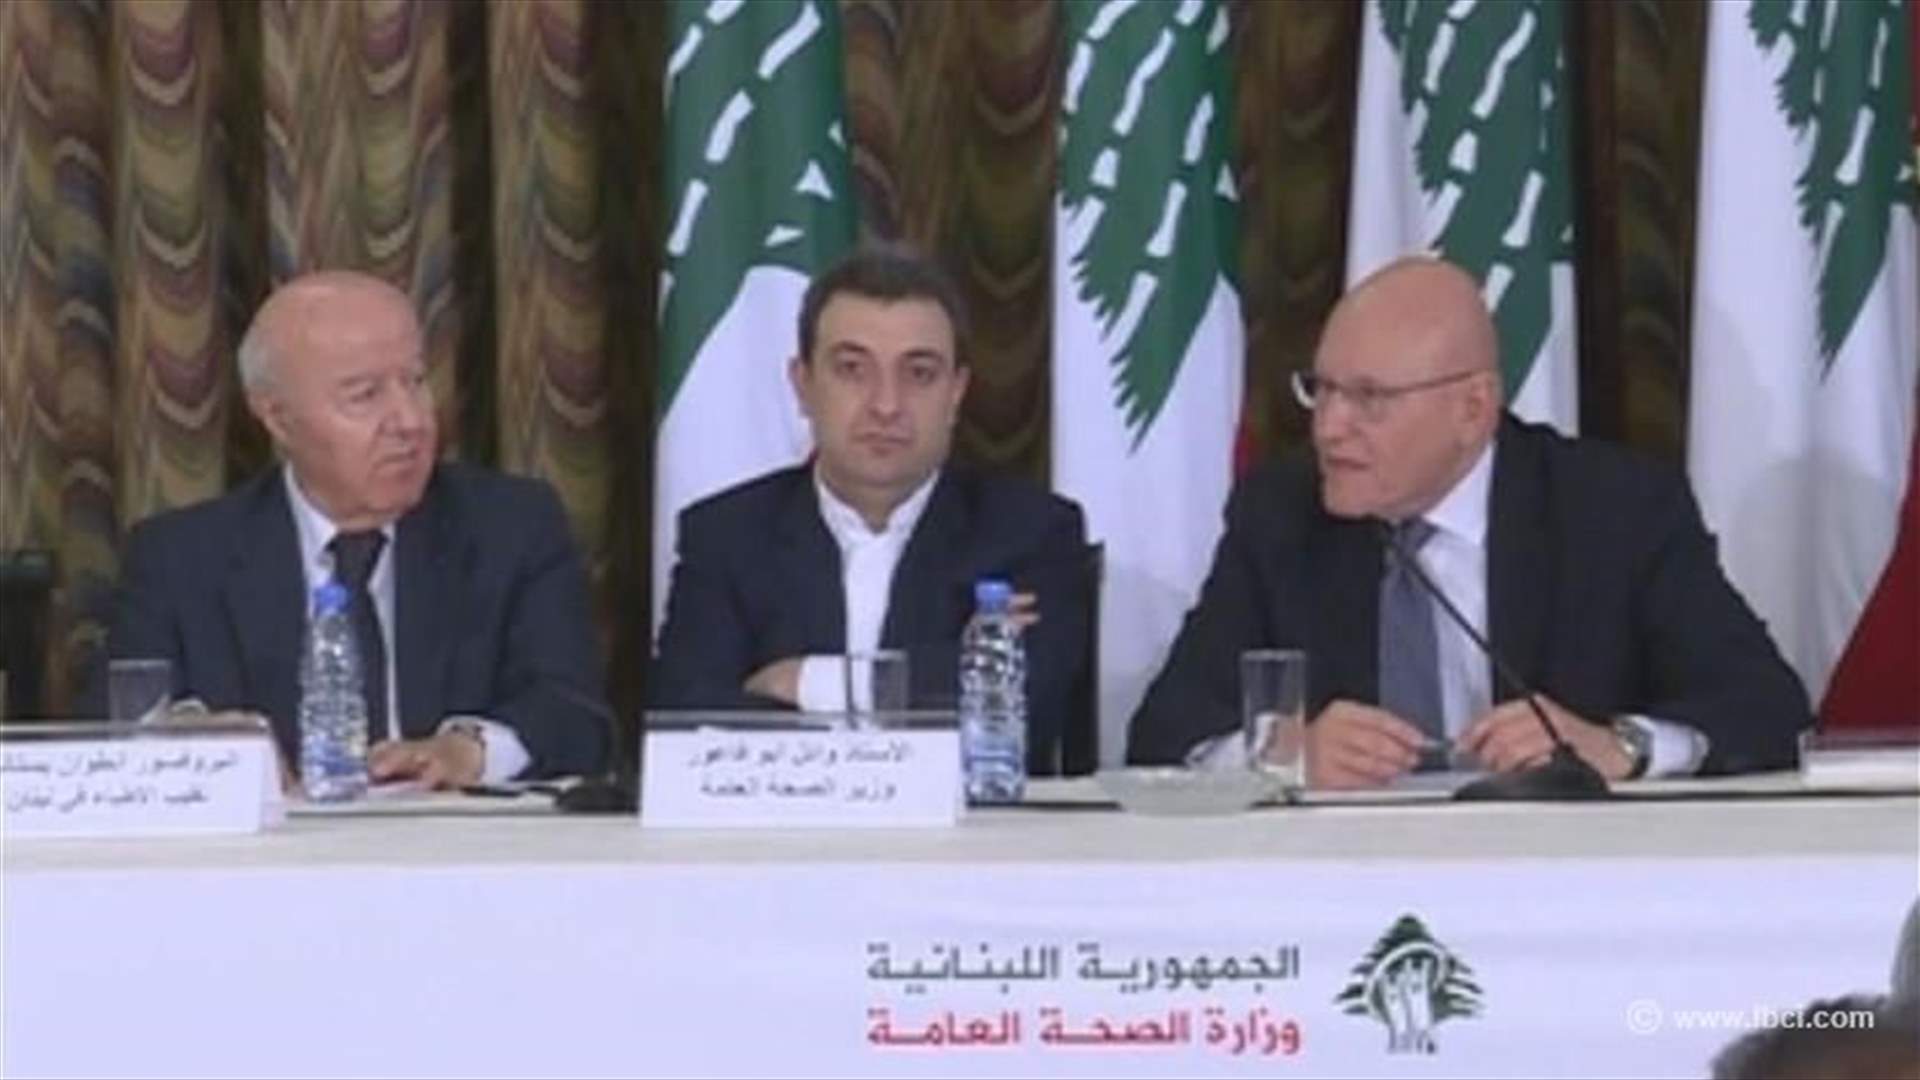 Lebanon’s remedy is election of president - PM